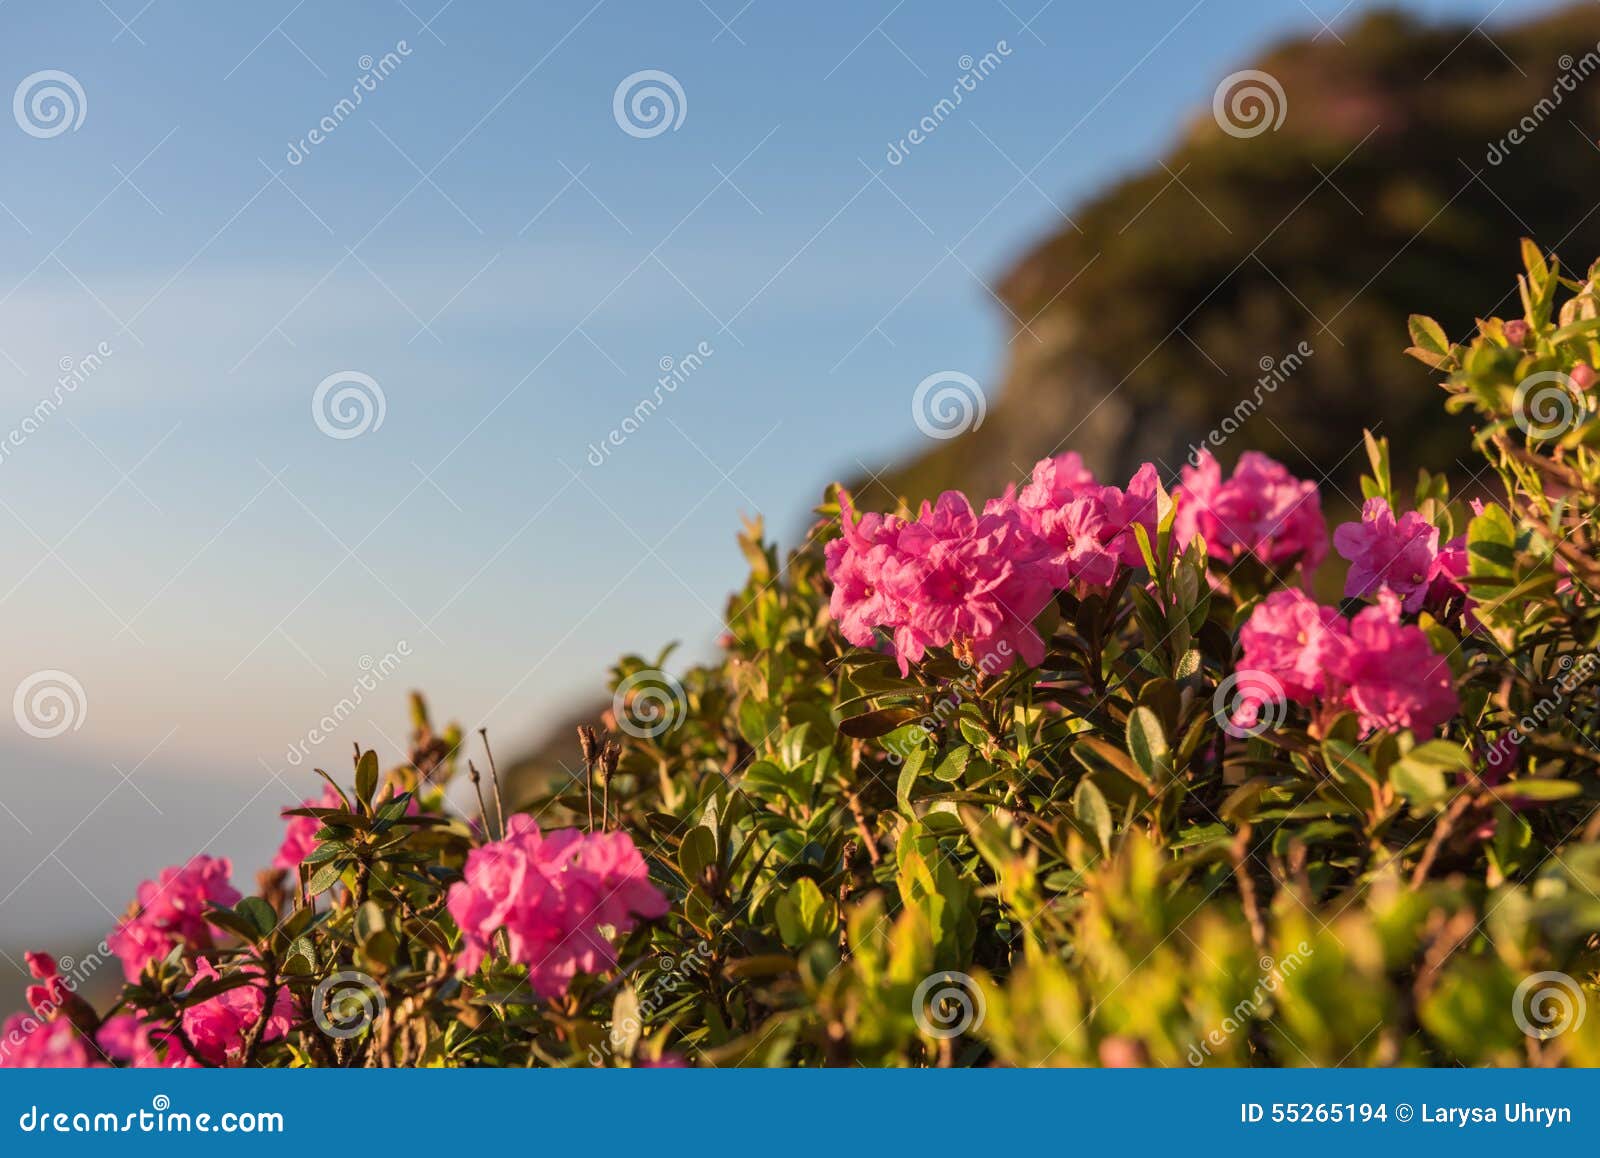 Pink Rhododendron Flowers On The Mountainside Stock Photo Image Of